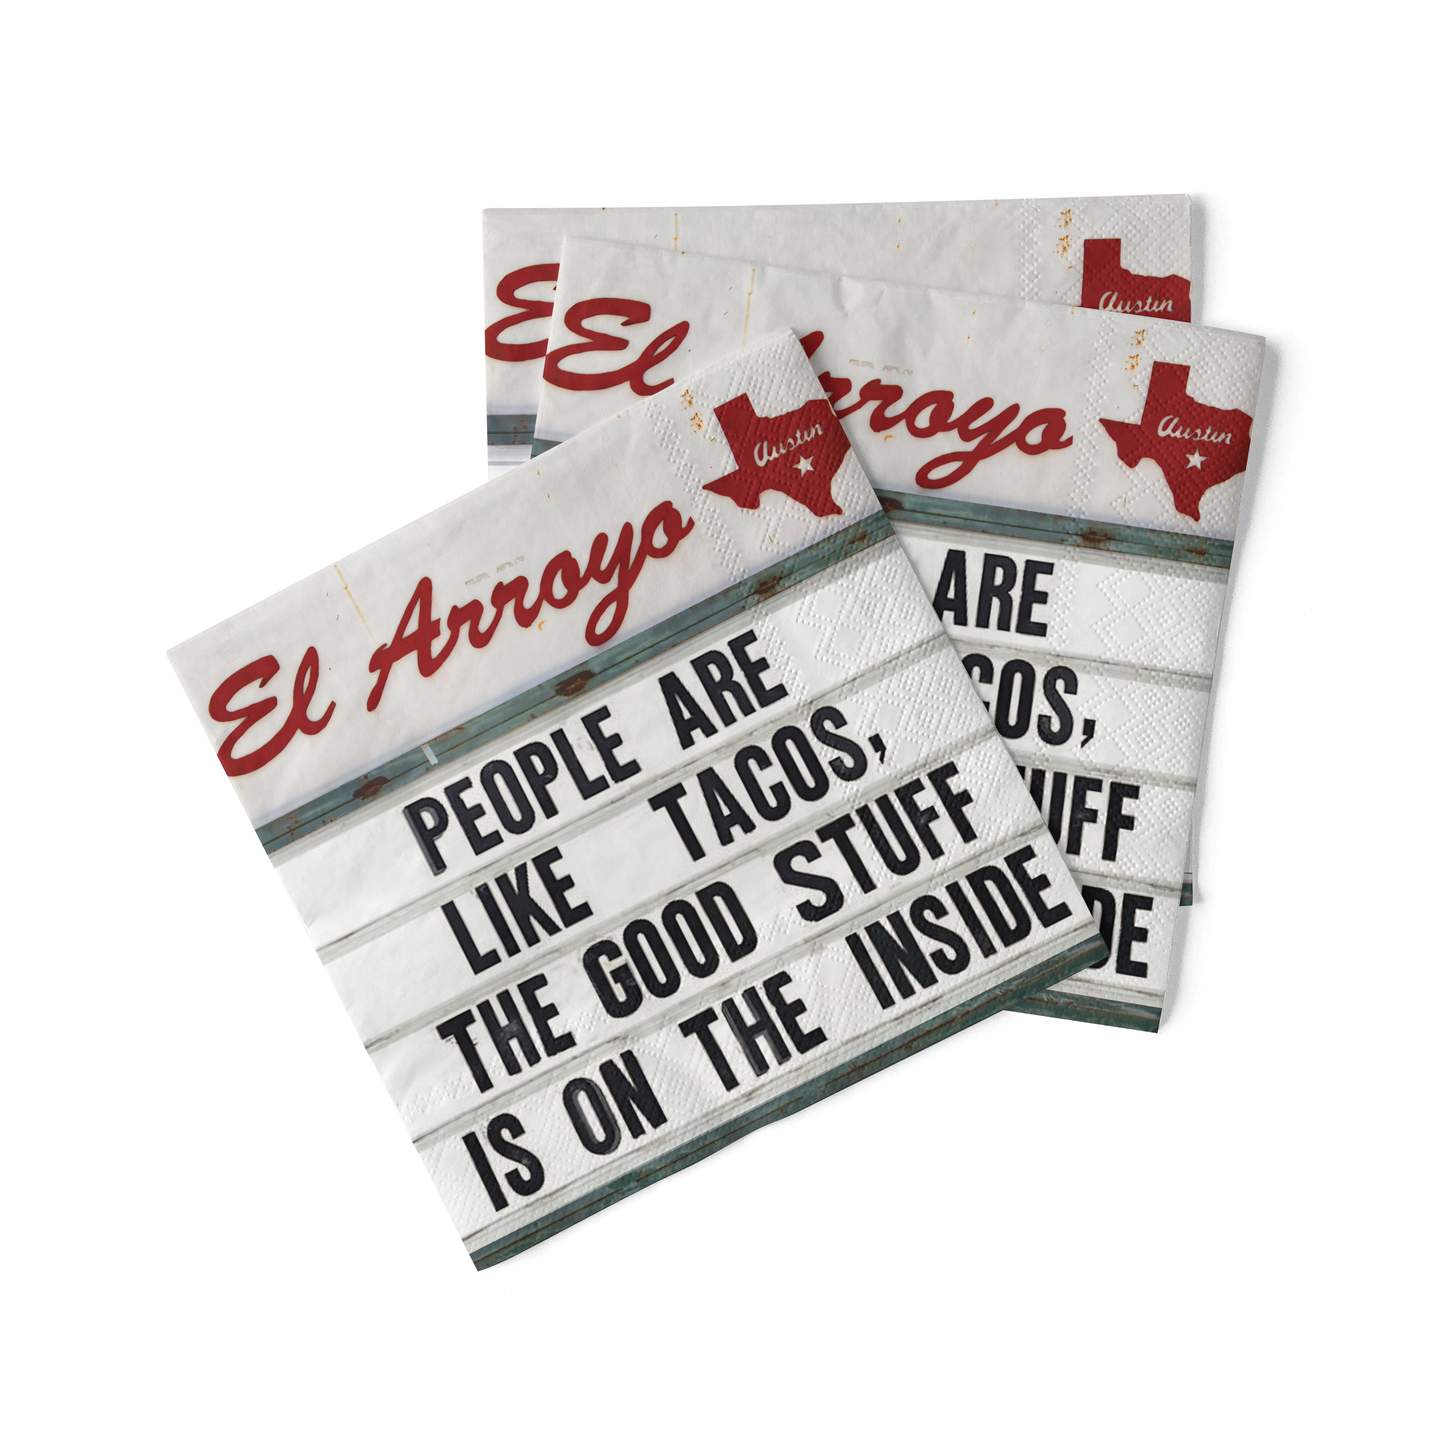 El Arroyo - Cocktail Napkins (Pack of 20) - People Are Tacos